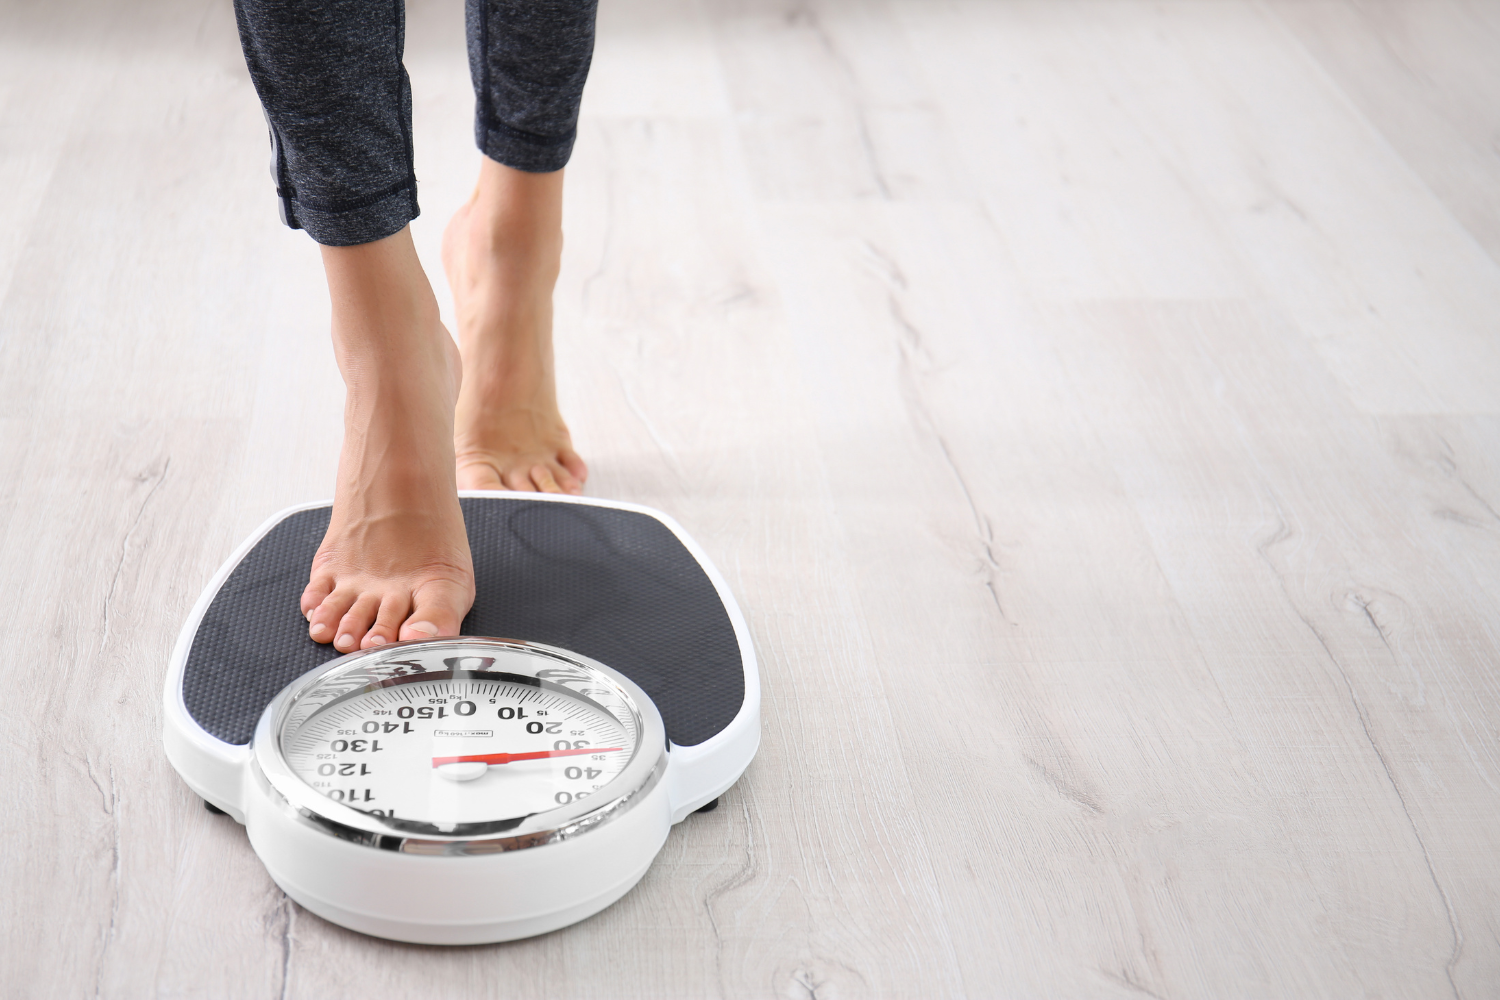 Why does body weight fluctuate?